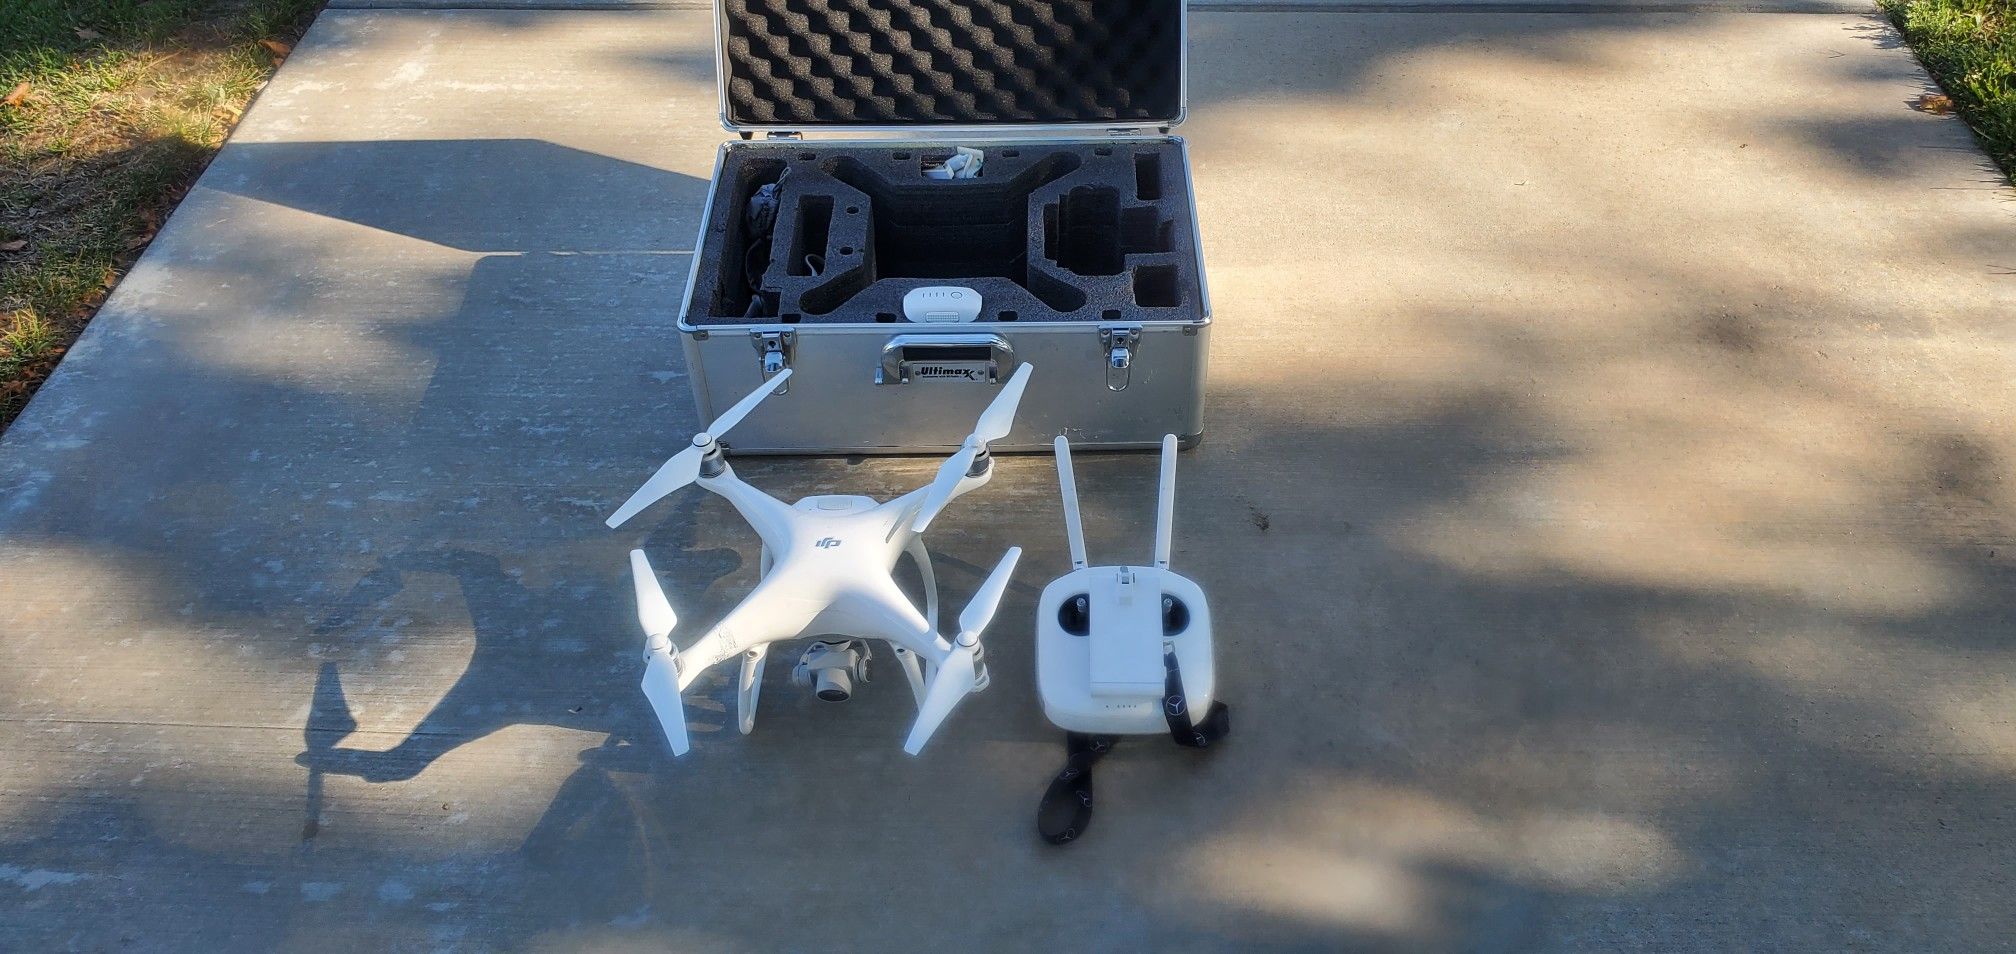 Dji Phantom 4 Make Offer comes with Hardcase and Accesories